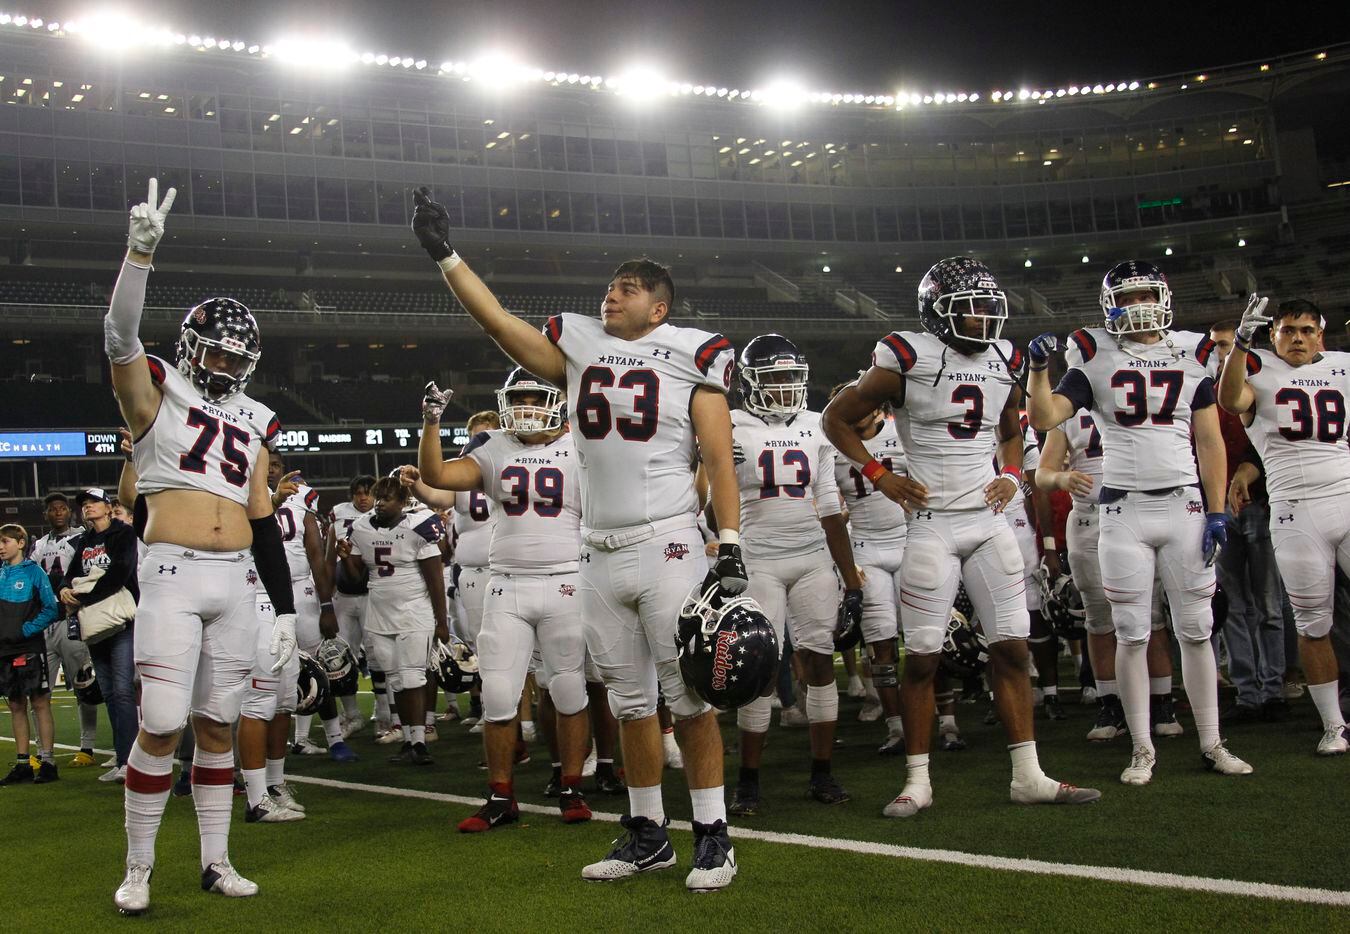 Denton Ryan Raiders pause for the playing of their school song following their 26-21 loss to College Station. The two teams played their Class 5A Division 1 Region ll final playoff football game at Baylor's McLane Stadium in Waco on December 3, 2021. (Steve Hamm/ Special Contributor)